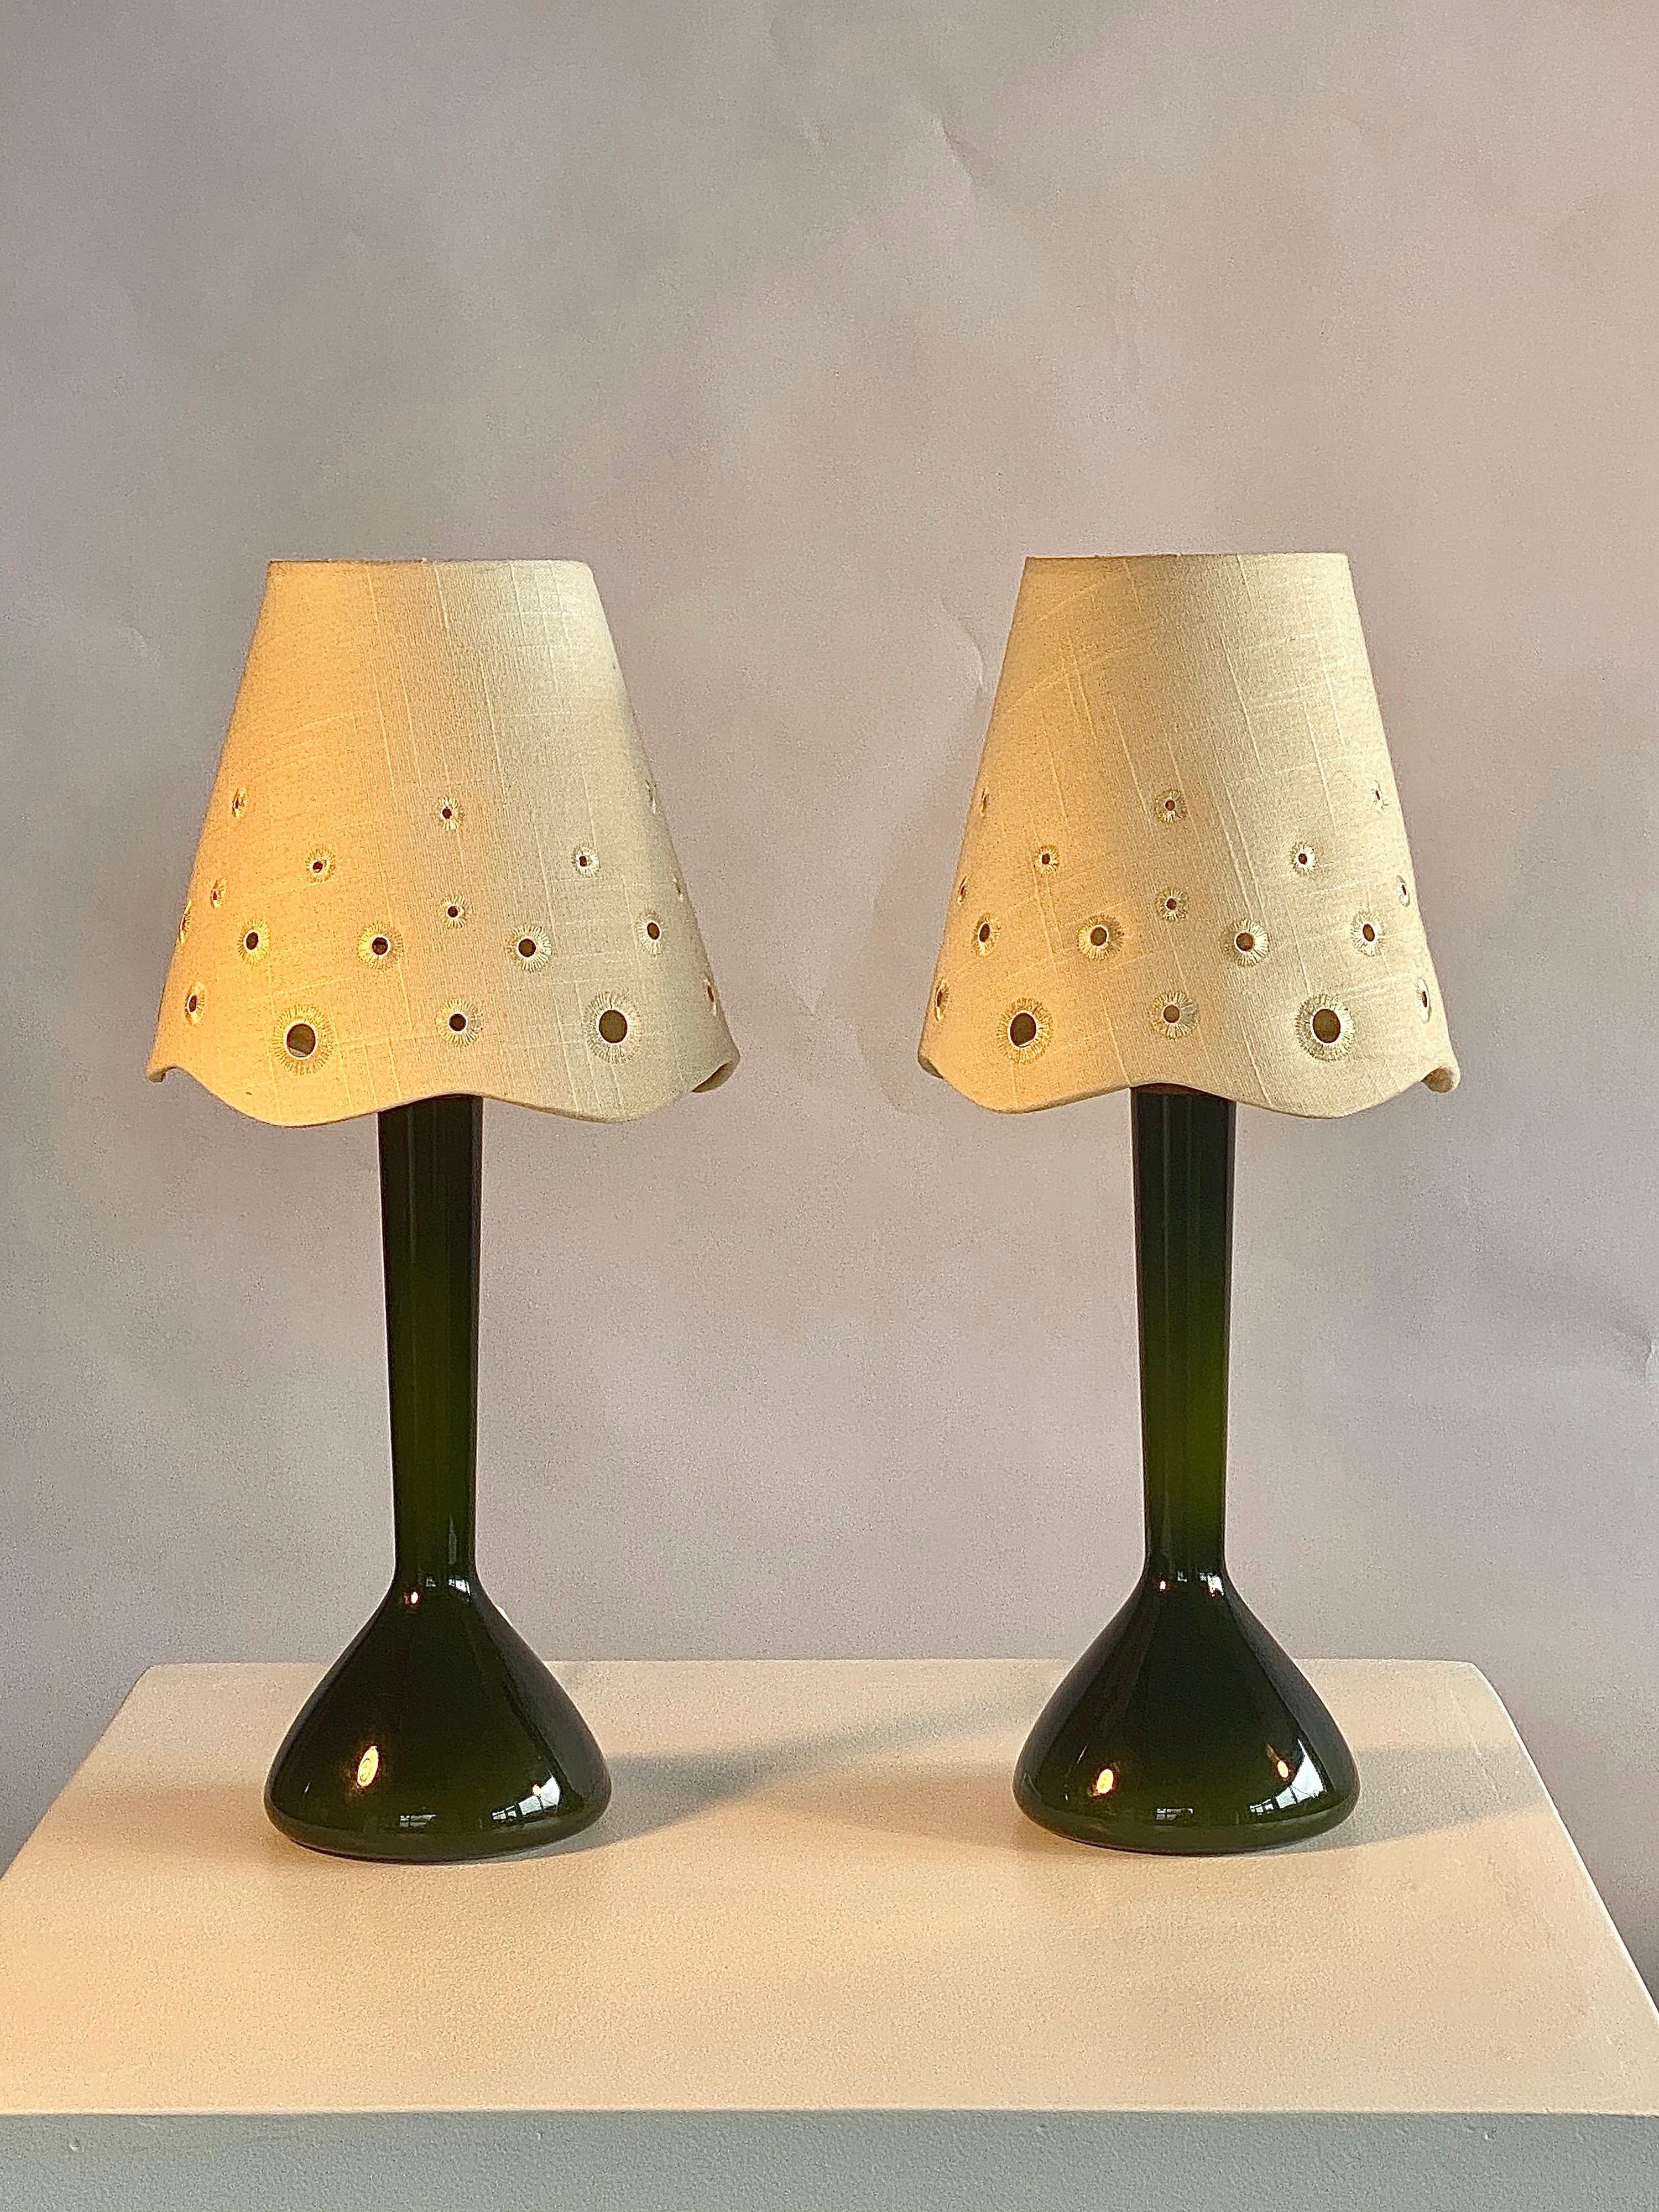 Beautiful and rare model dark green hand blown glass pair of lights by Kastrup Holmegaard, Danish design of the 1960s. The shades have round holes in them, which when the lamps are lit in a dark environment, gives a very mystical diffuse light with